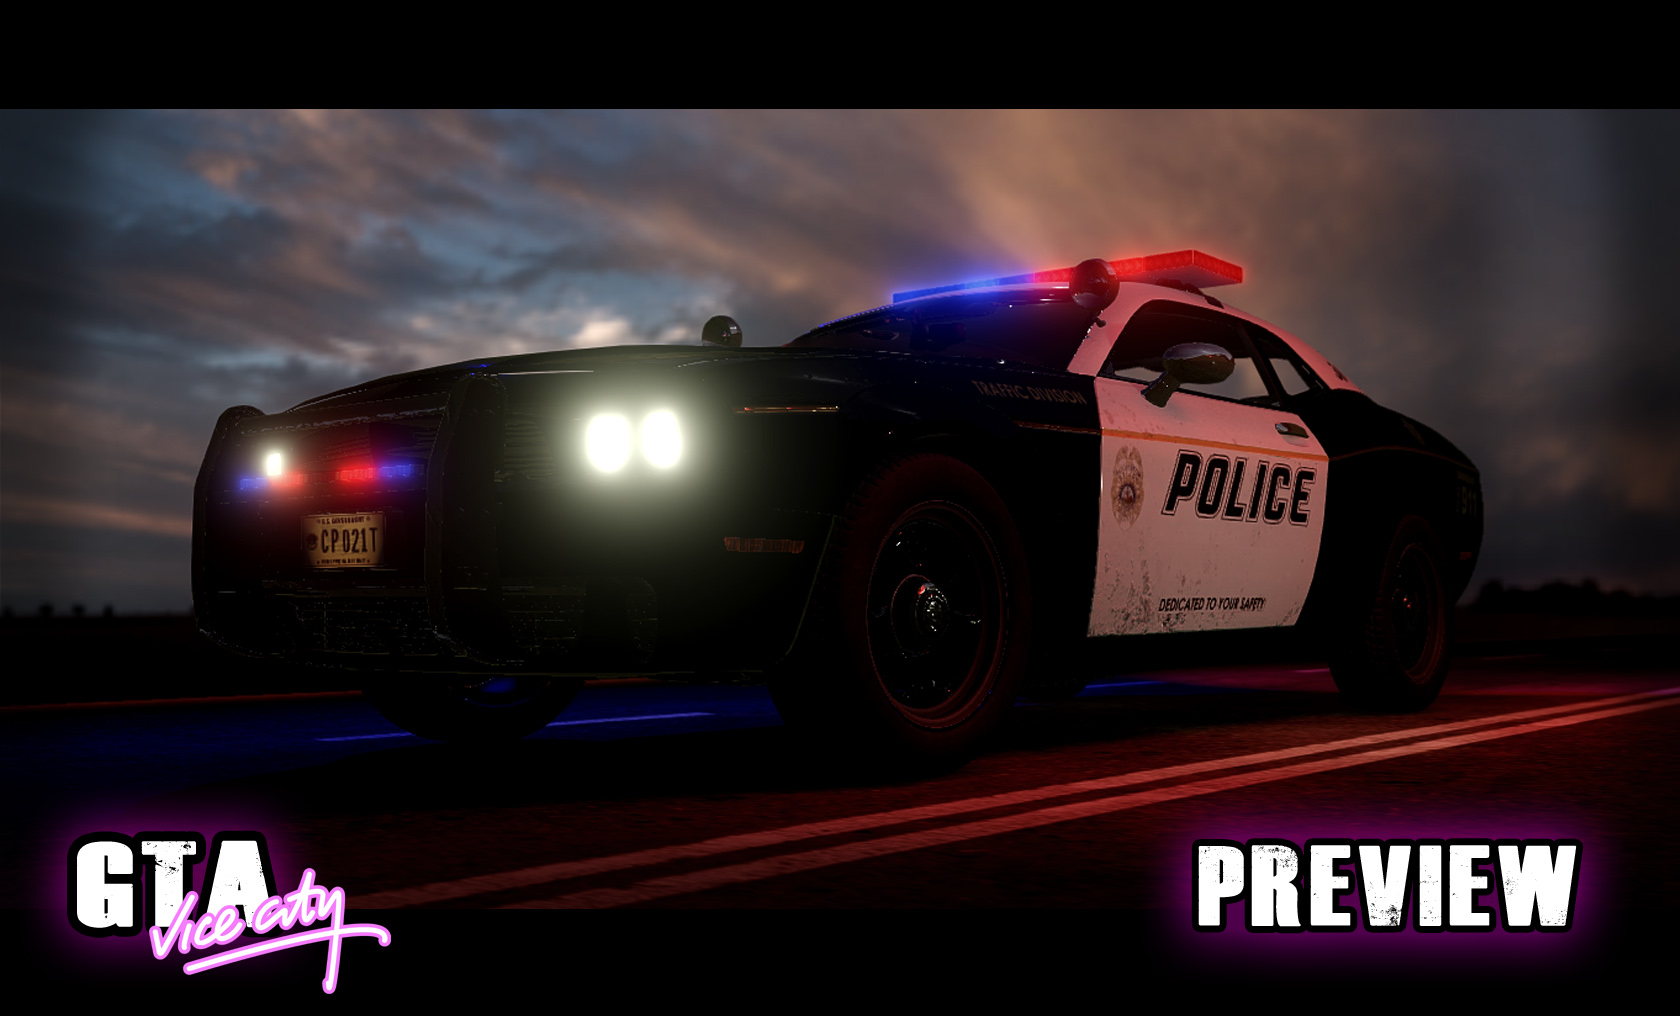 More information about "VC Police Cruiser"